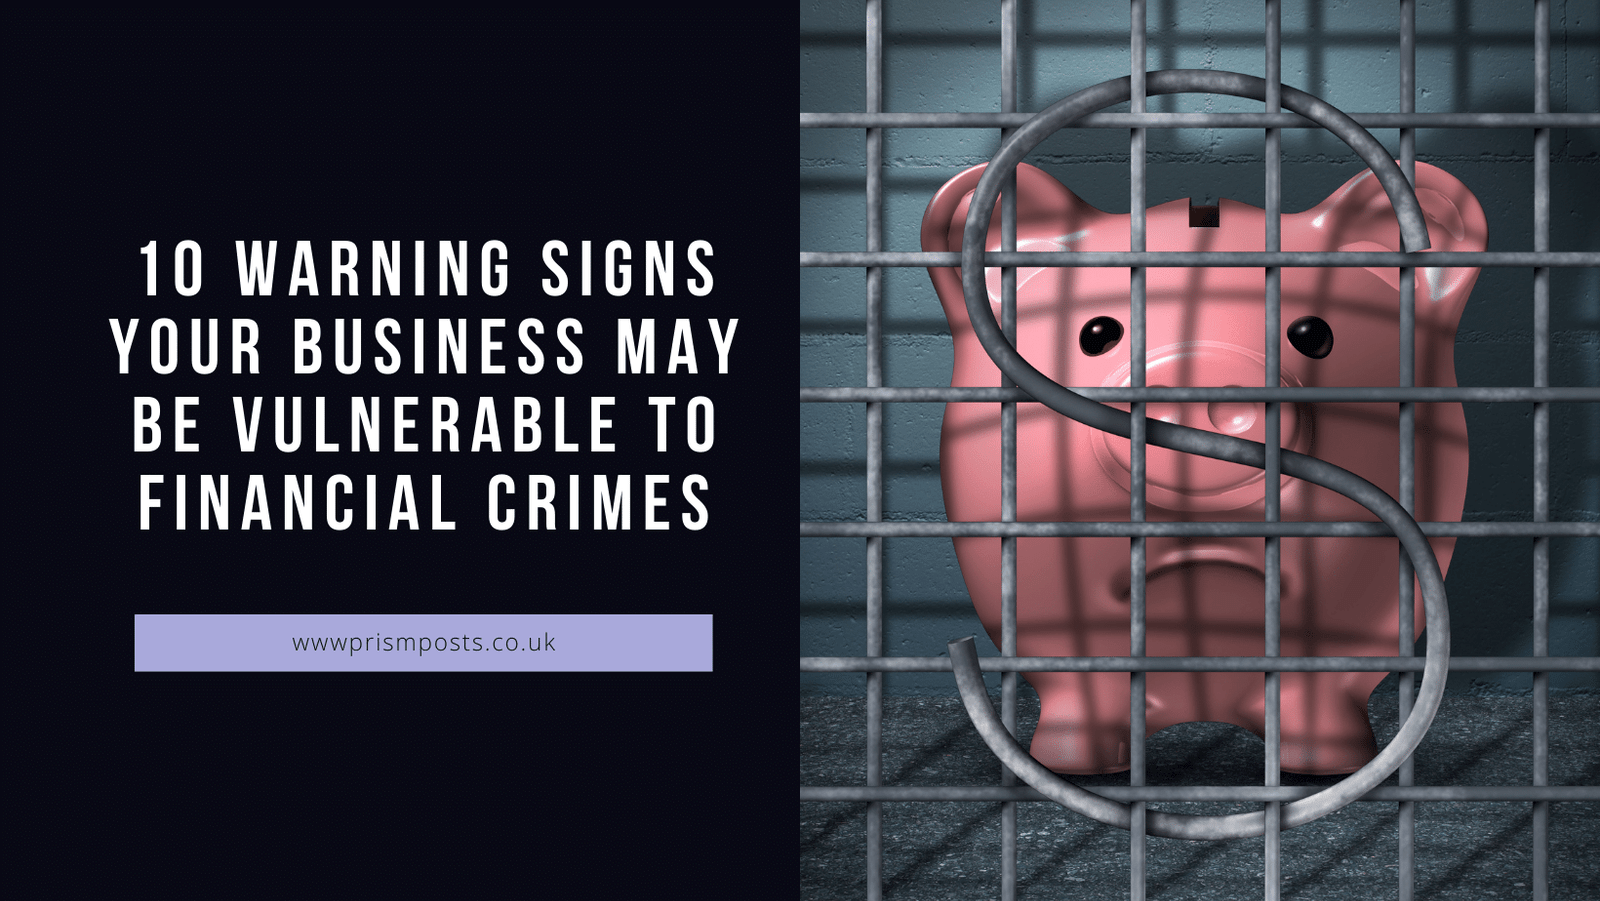 10 Warning Signs Your Business May Be Vulnerable to Financial Crimes